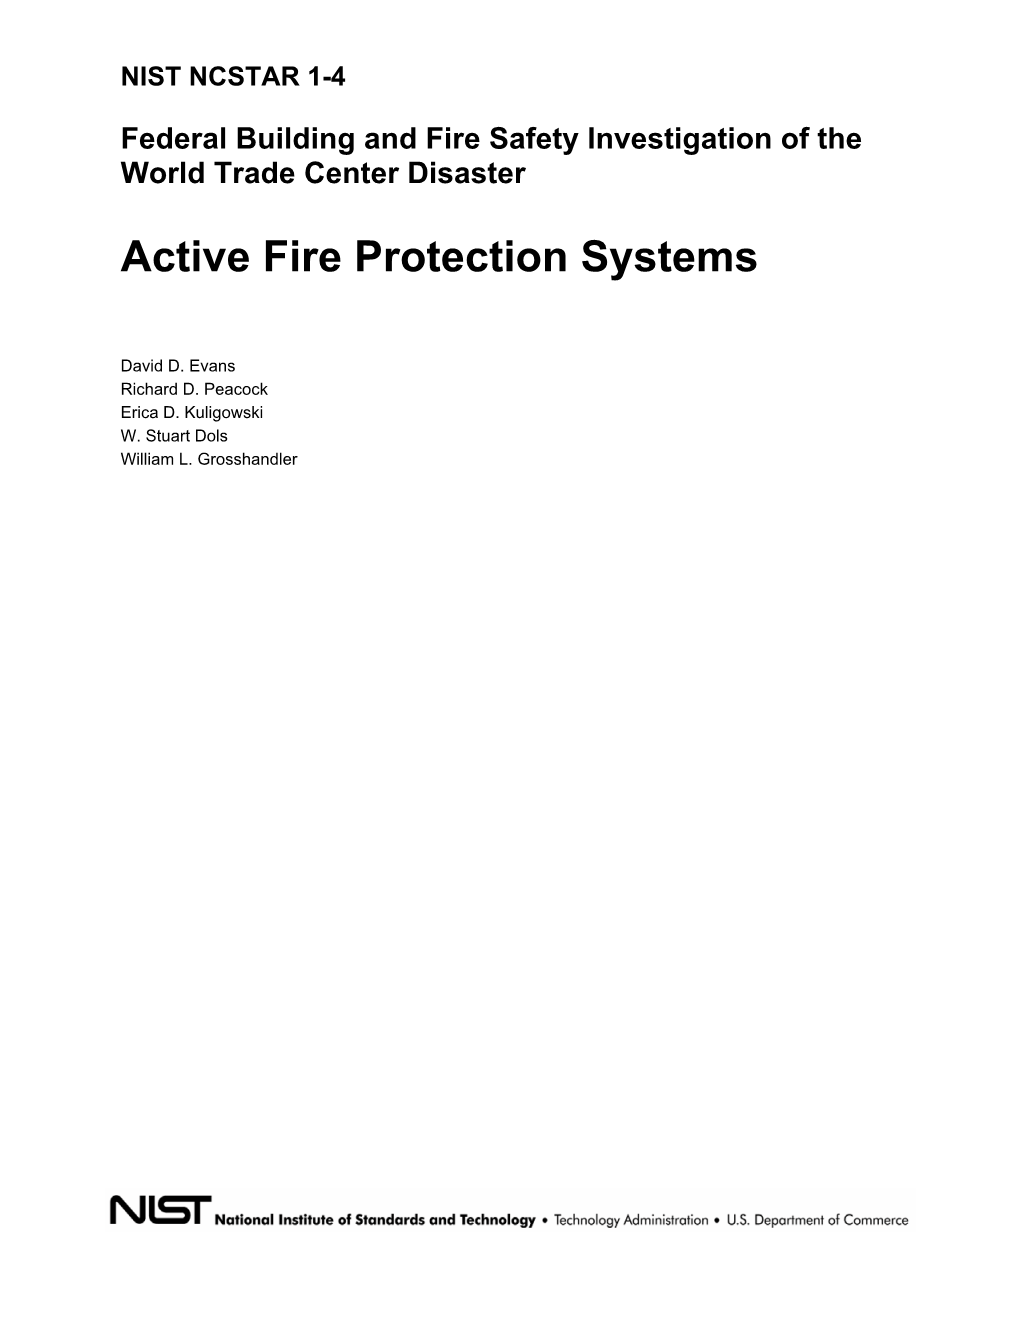 Active Fire Protection Systems